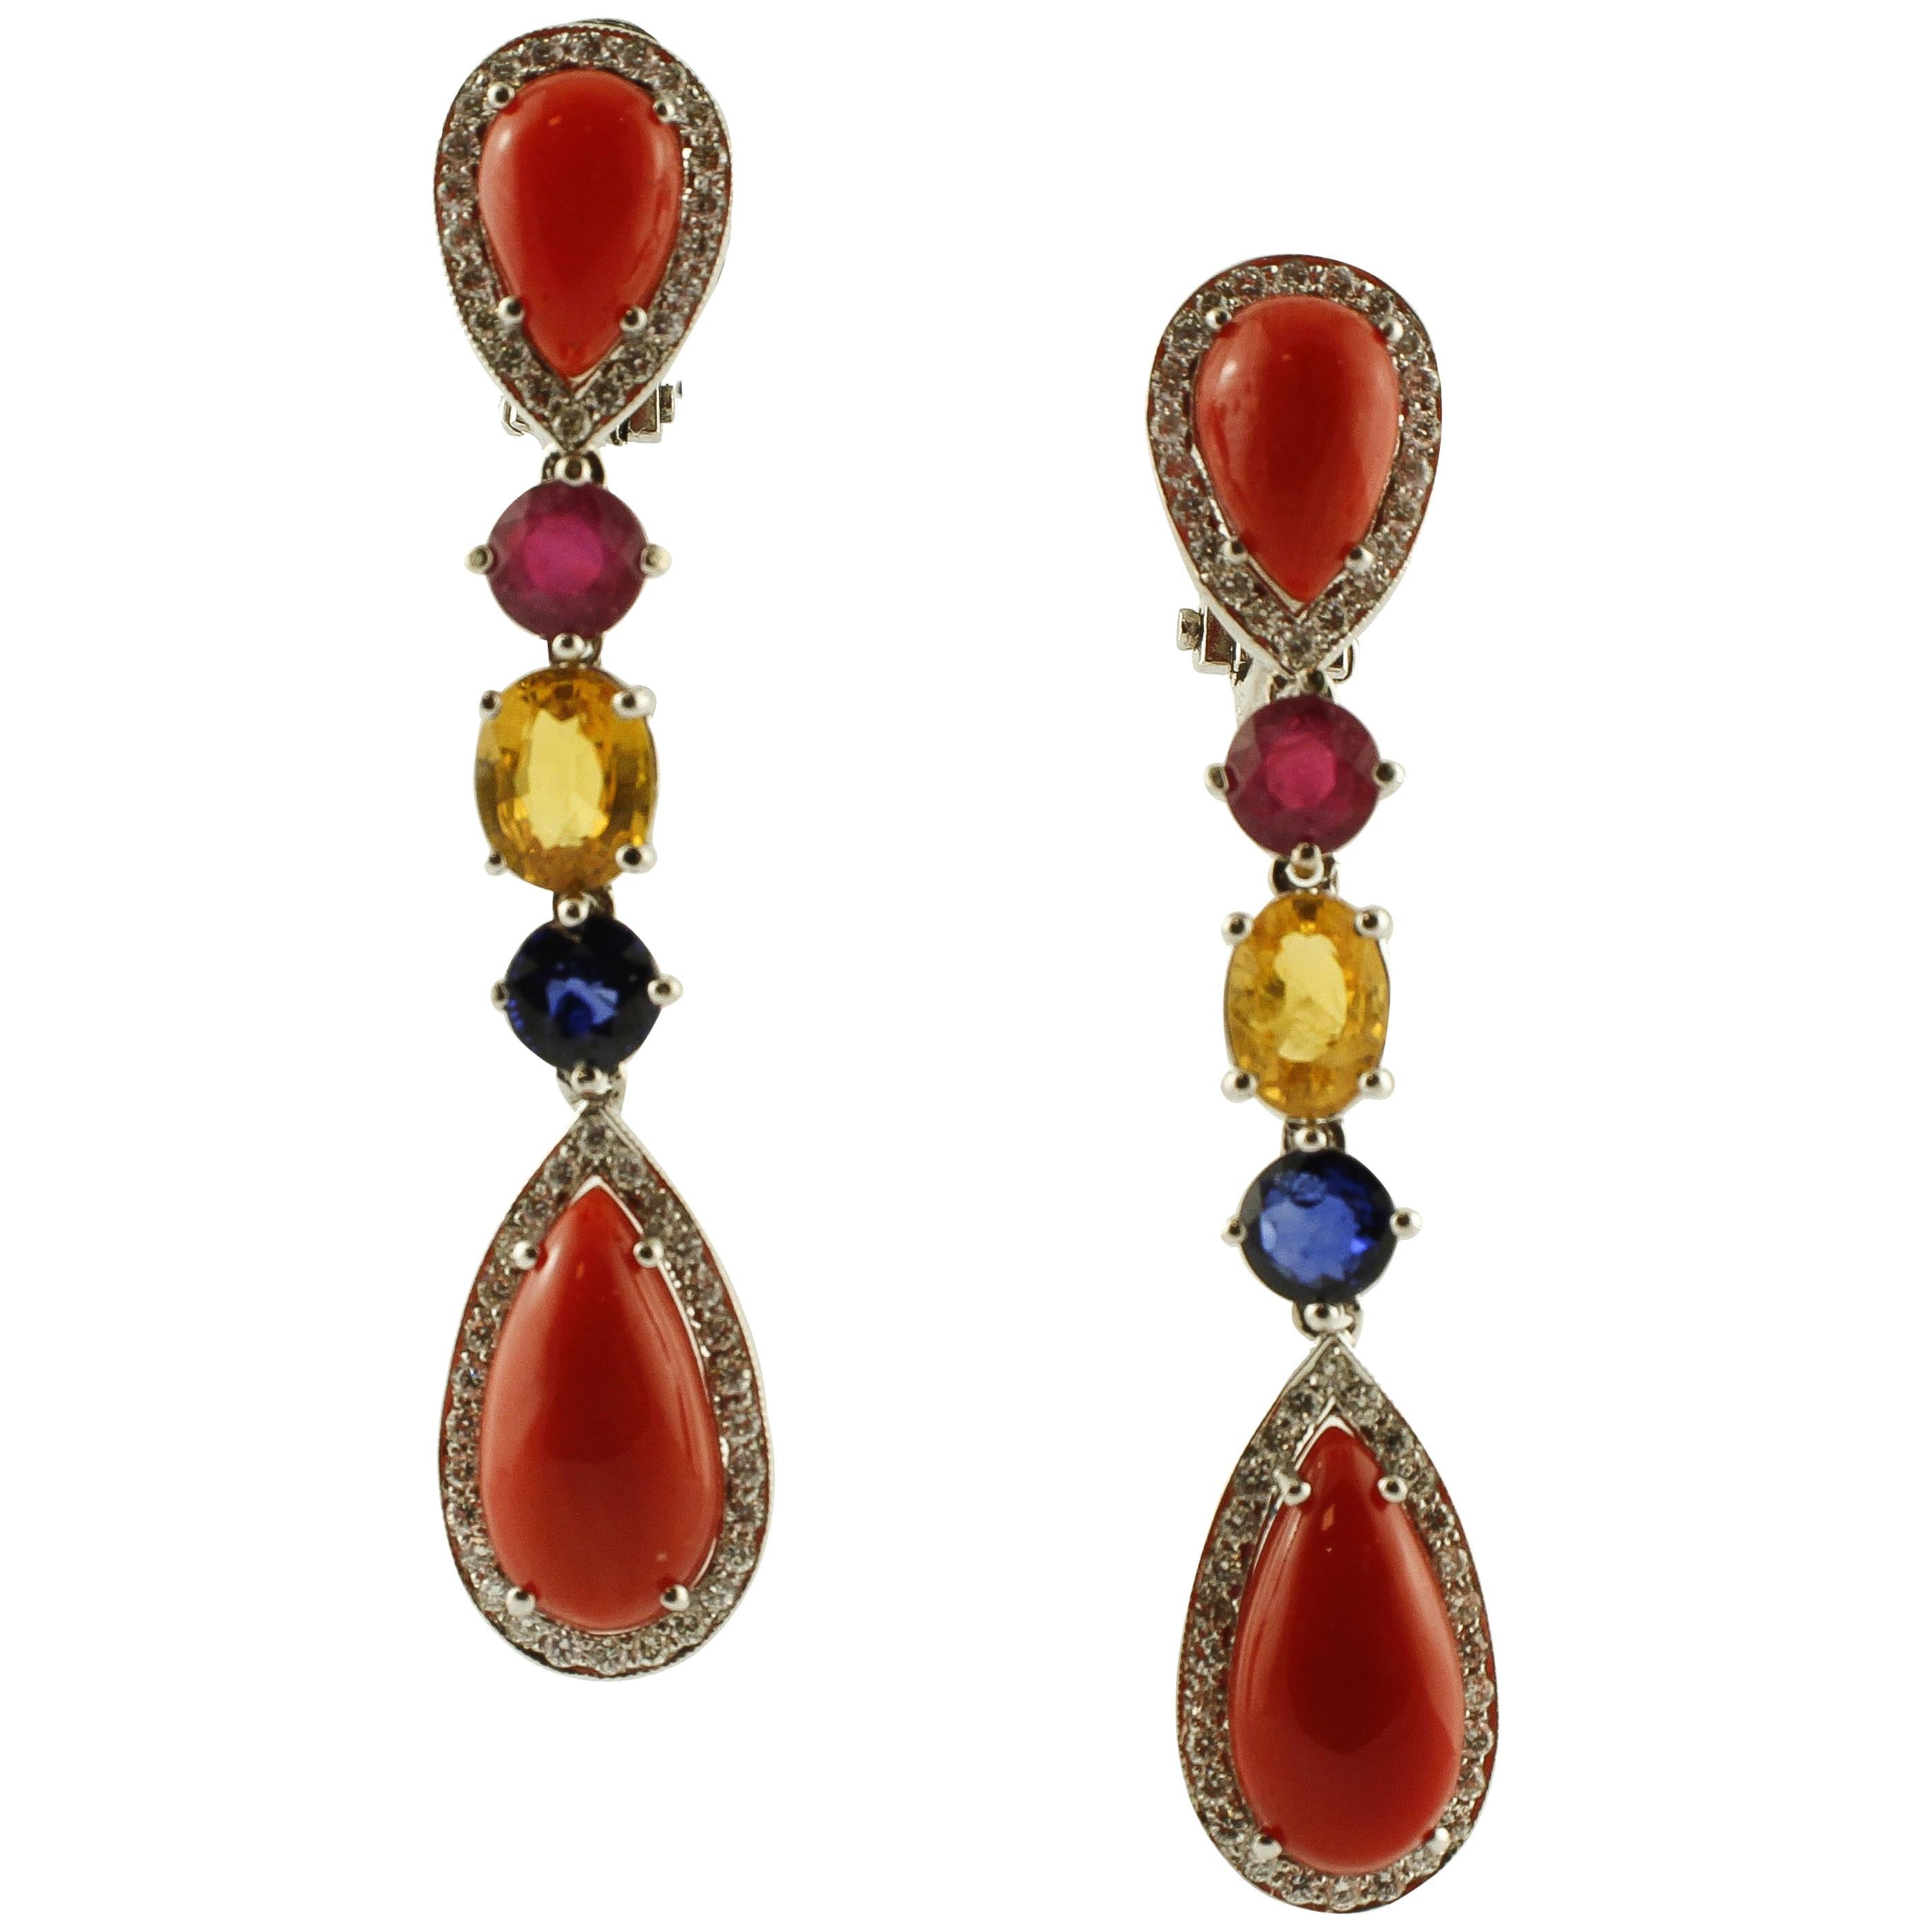 Diamonds,Rubies, Yellow/Blue Sapphires, Red Coral Drops 18K Gold Dangle Earrings